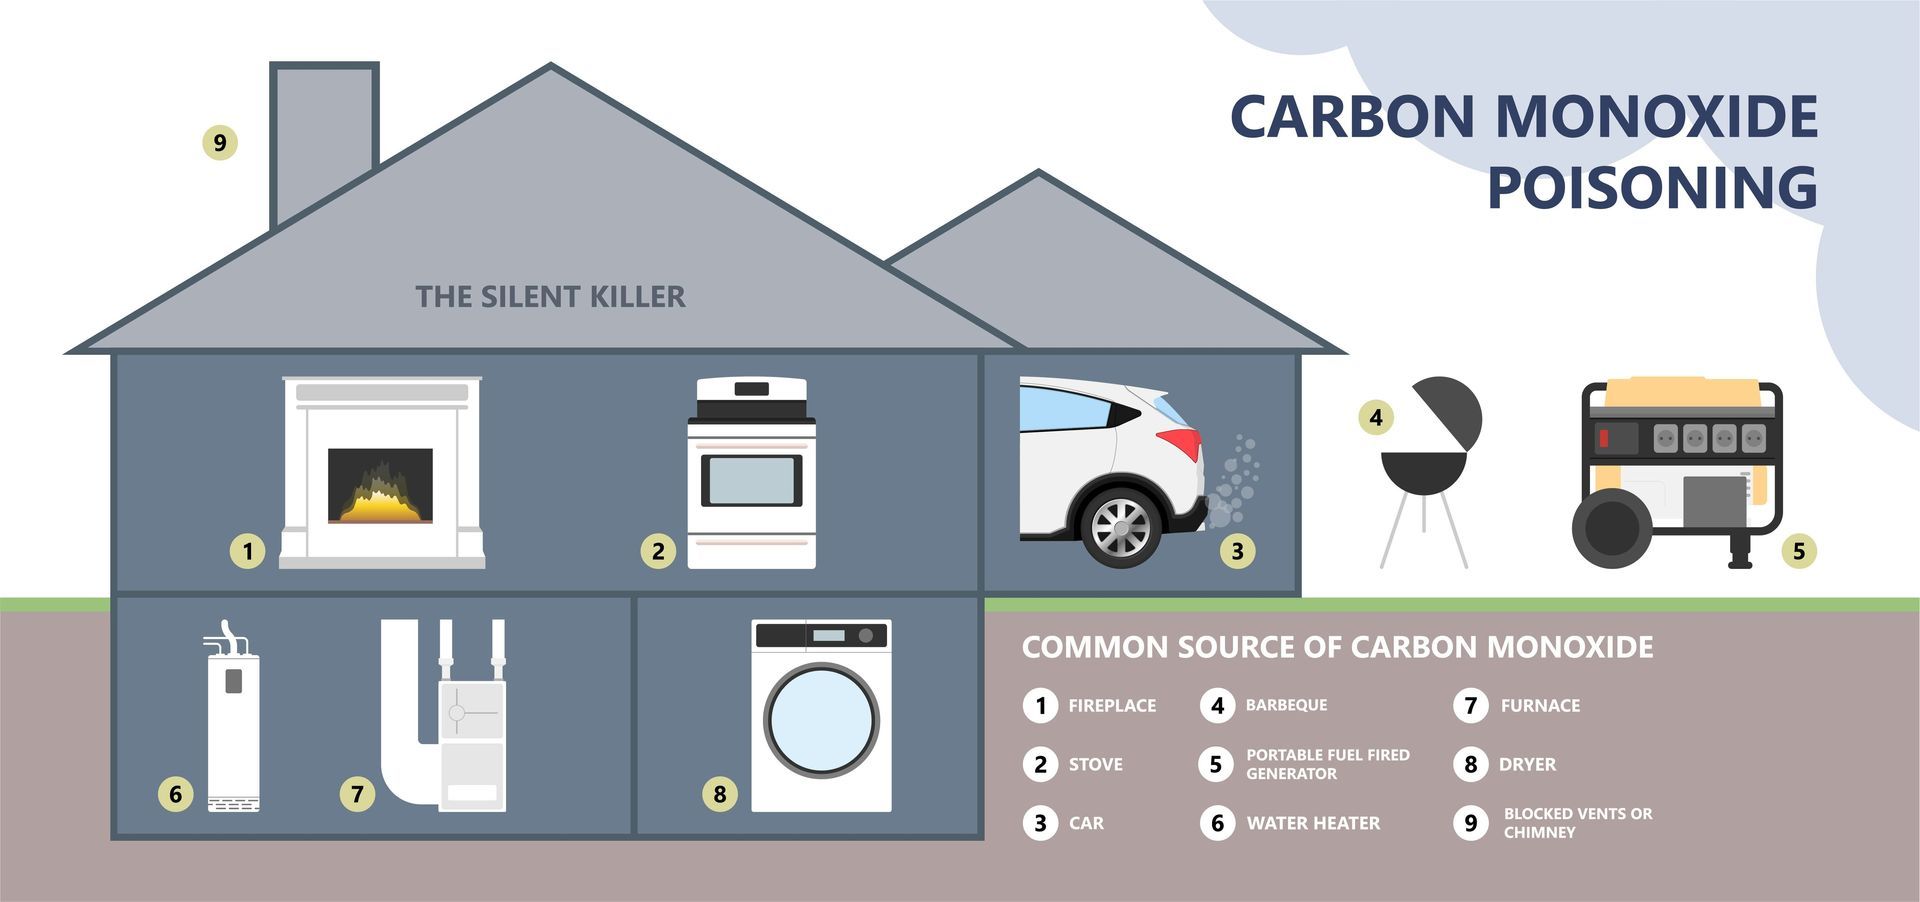 Most common causes of carbon monoxide poisoning